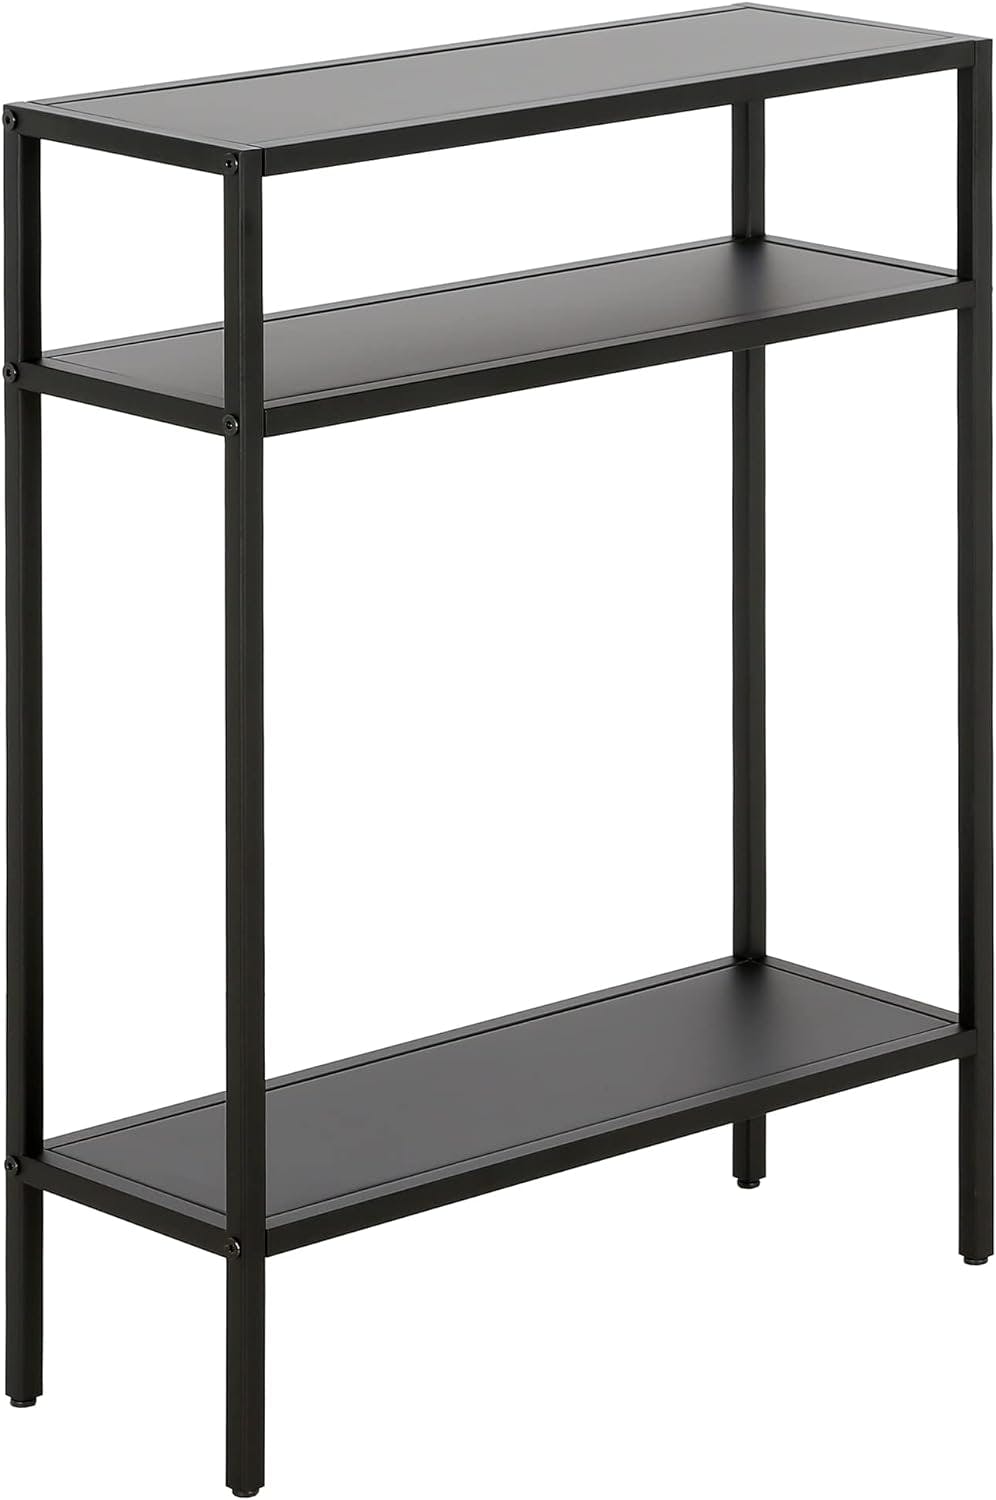 Ricardo Compact Blackened Bronze Console Table with Metal Shelves